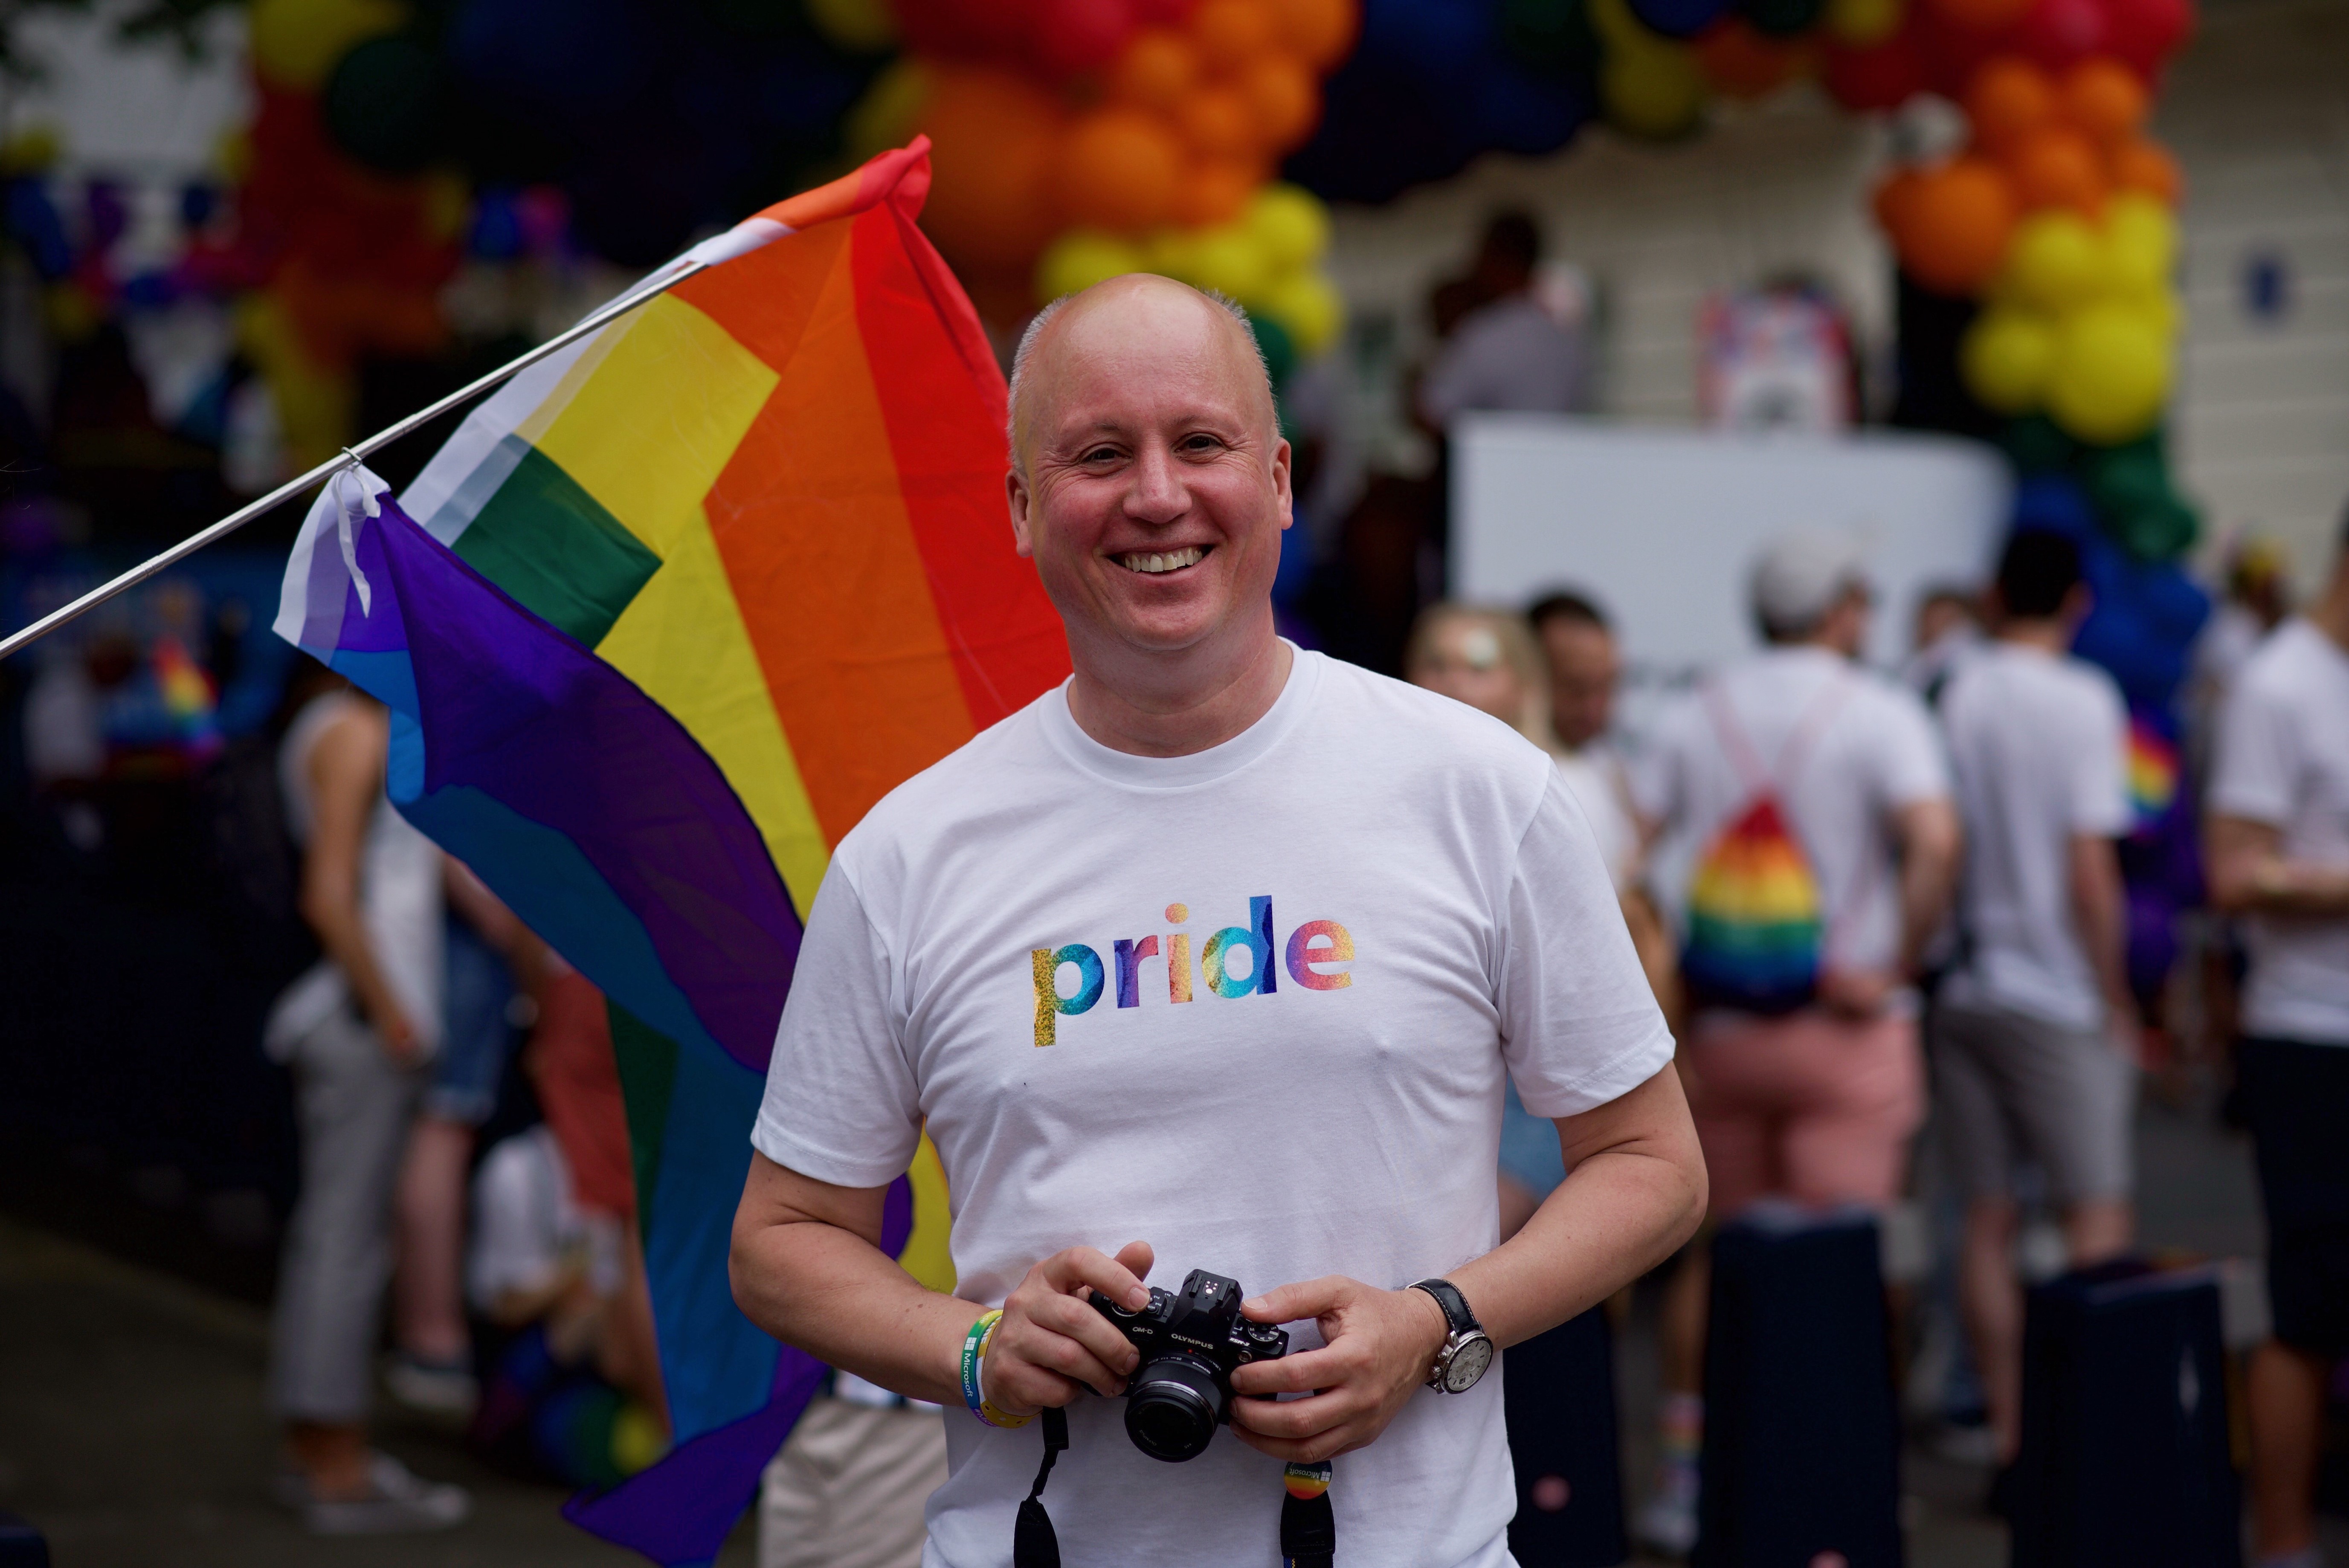 A Microsoft staff member holds a camera during PRIDE in London